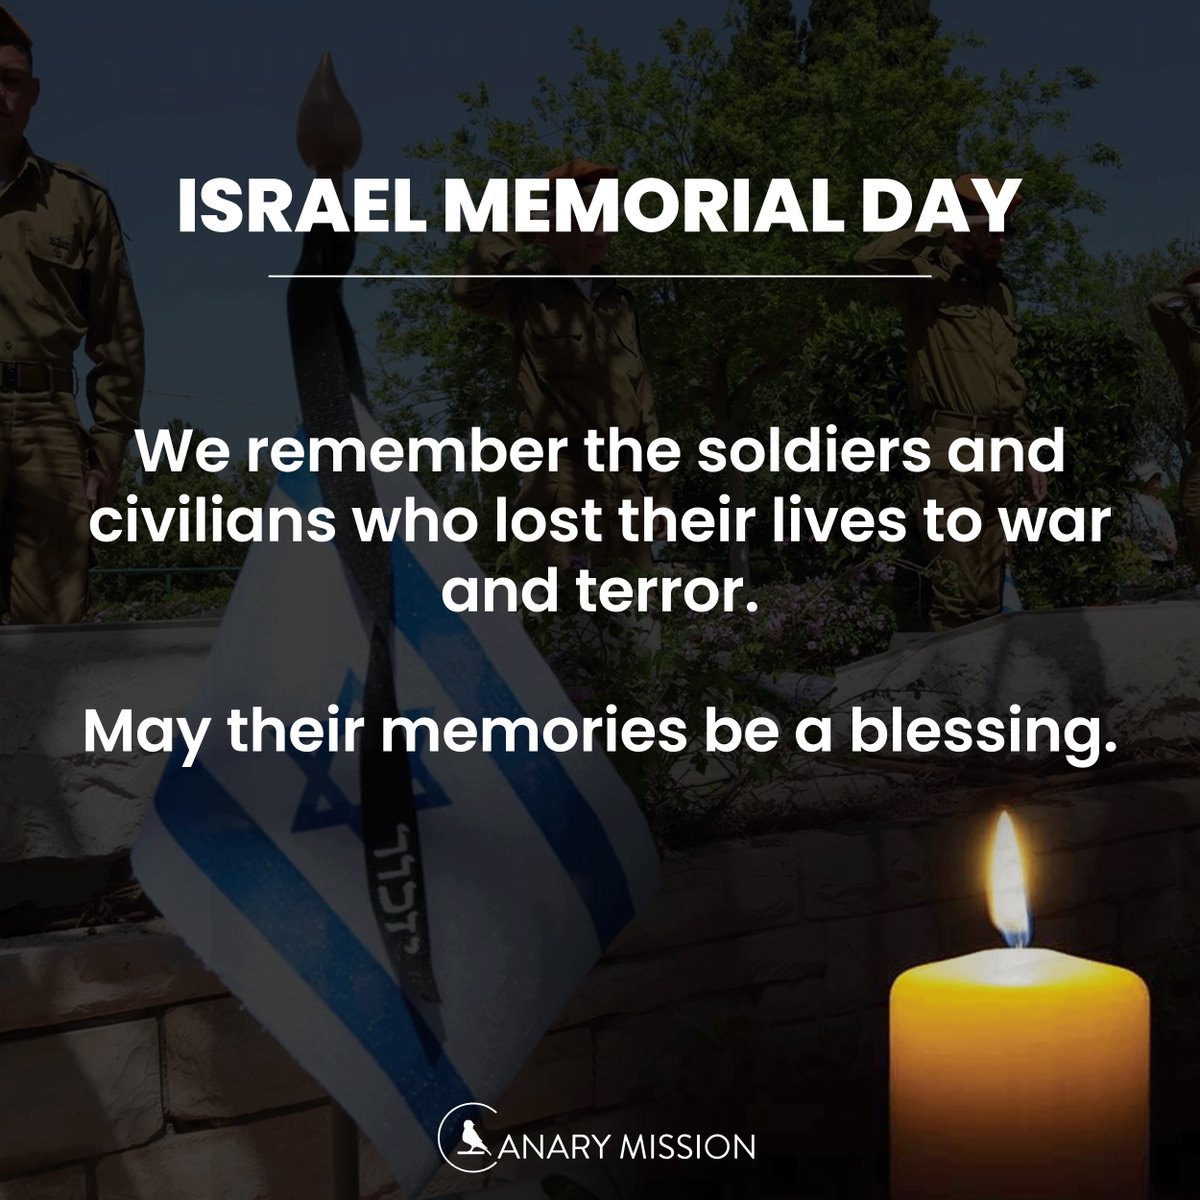 Since last year's Memorial Day, 766 IDF soldiers were killed & 833 civilians died in terror attacks, a total of 25,034 fallen soldiers & 4,236 victims of terror since the founding of the modern state in 1948. May their memories be a blessing.